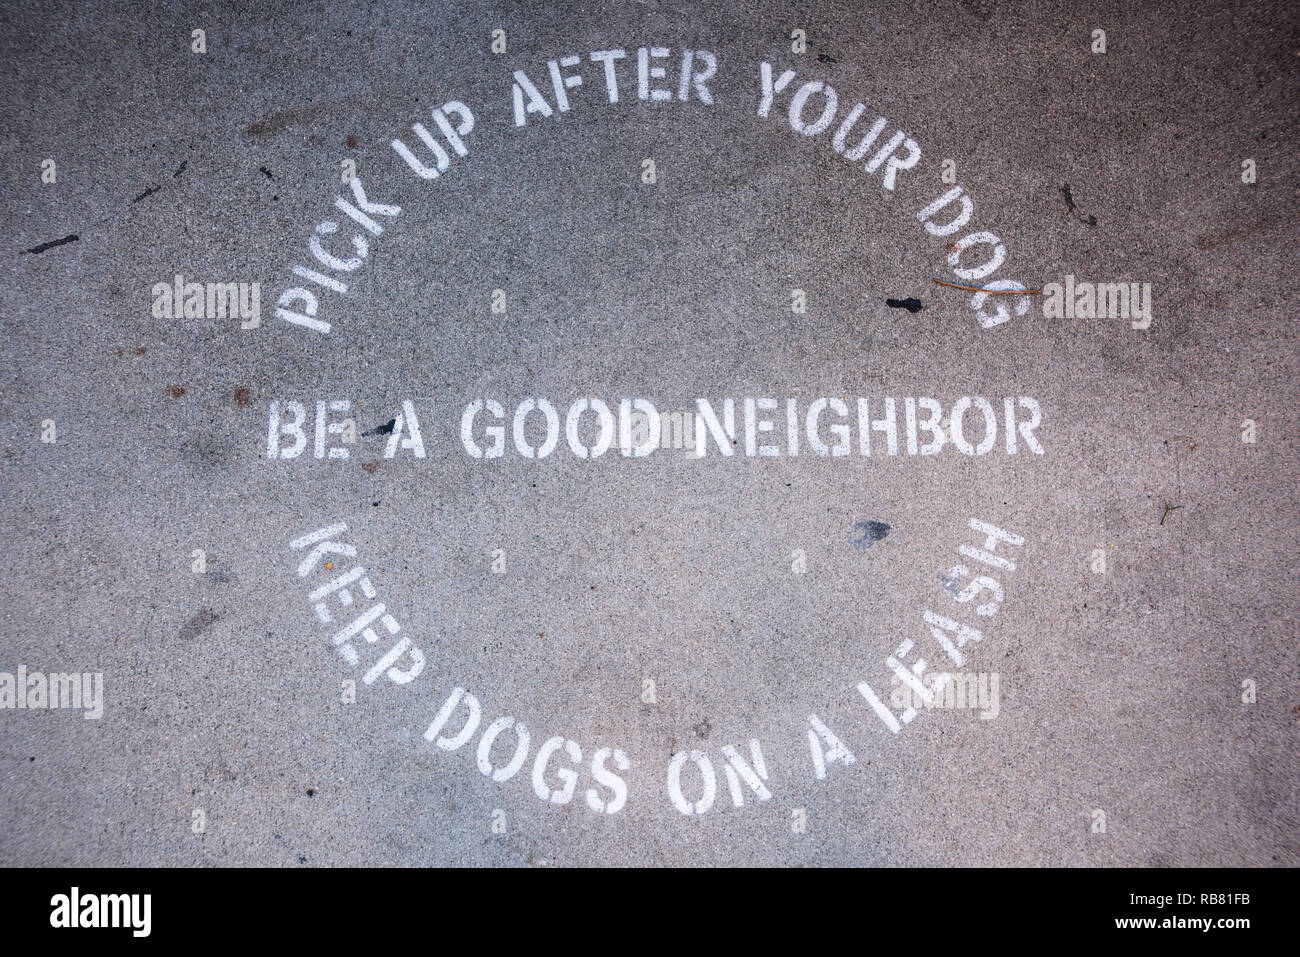 Pick up after your dog. Be a good neighbor. Stock Photo